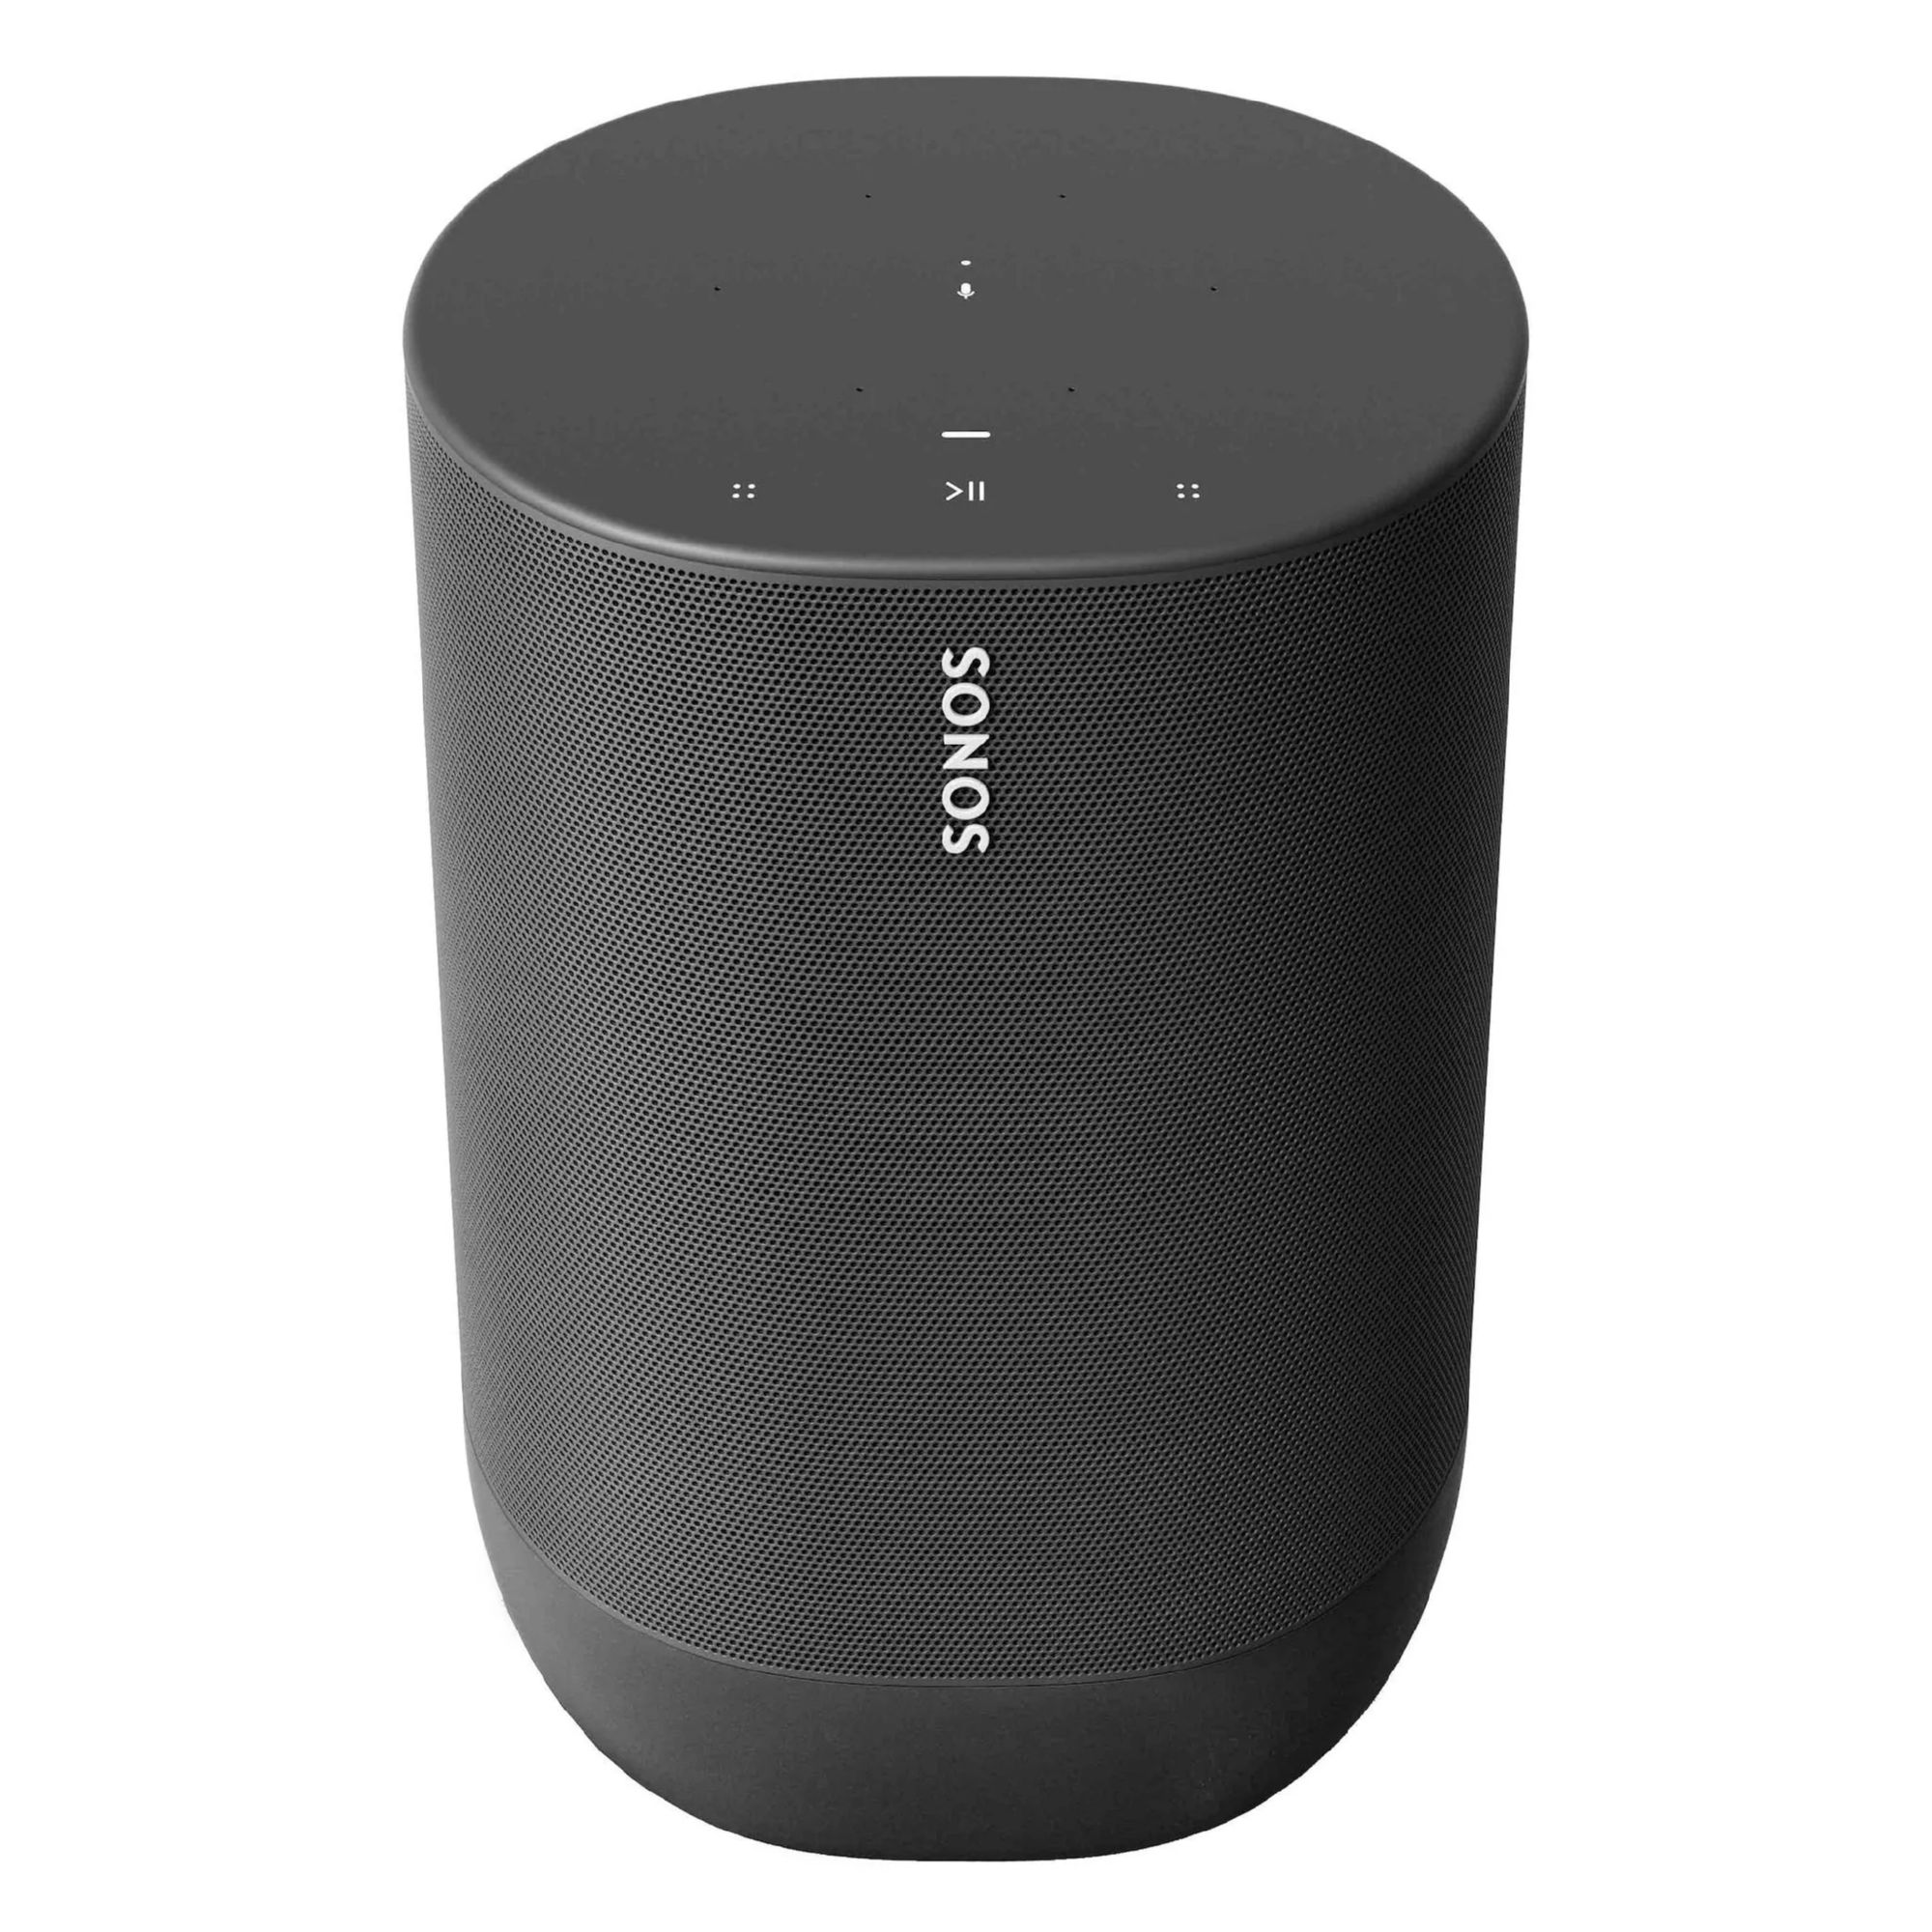 Sonos Move - Portable Bluetooth Speaker with WiFi